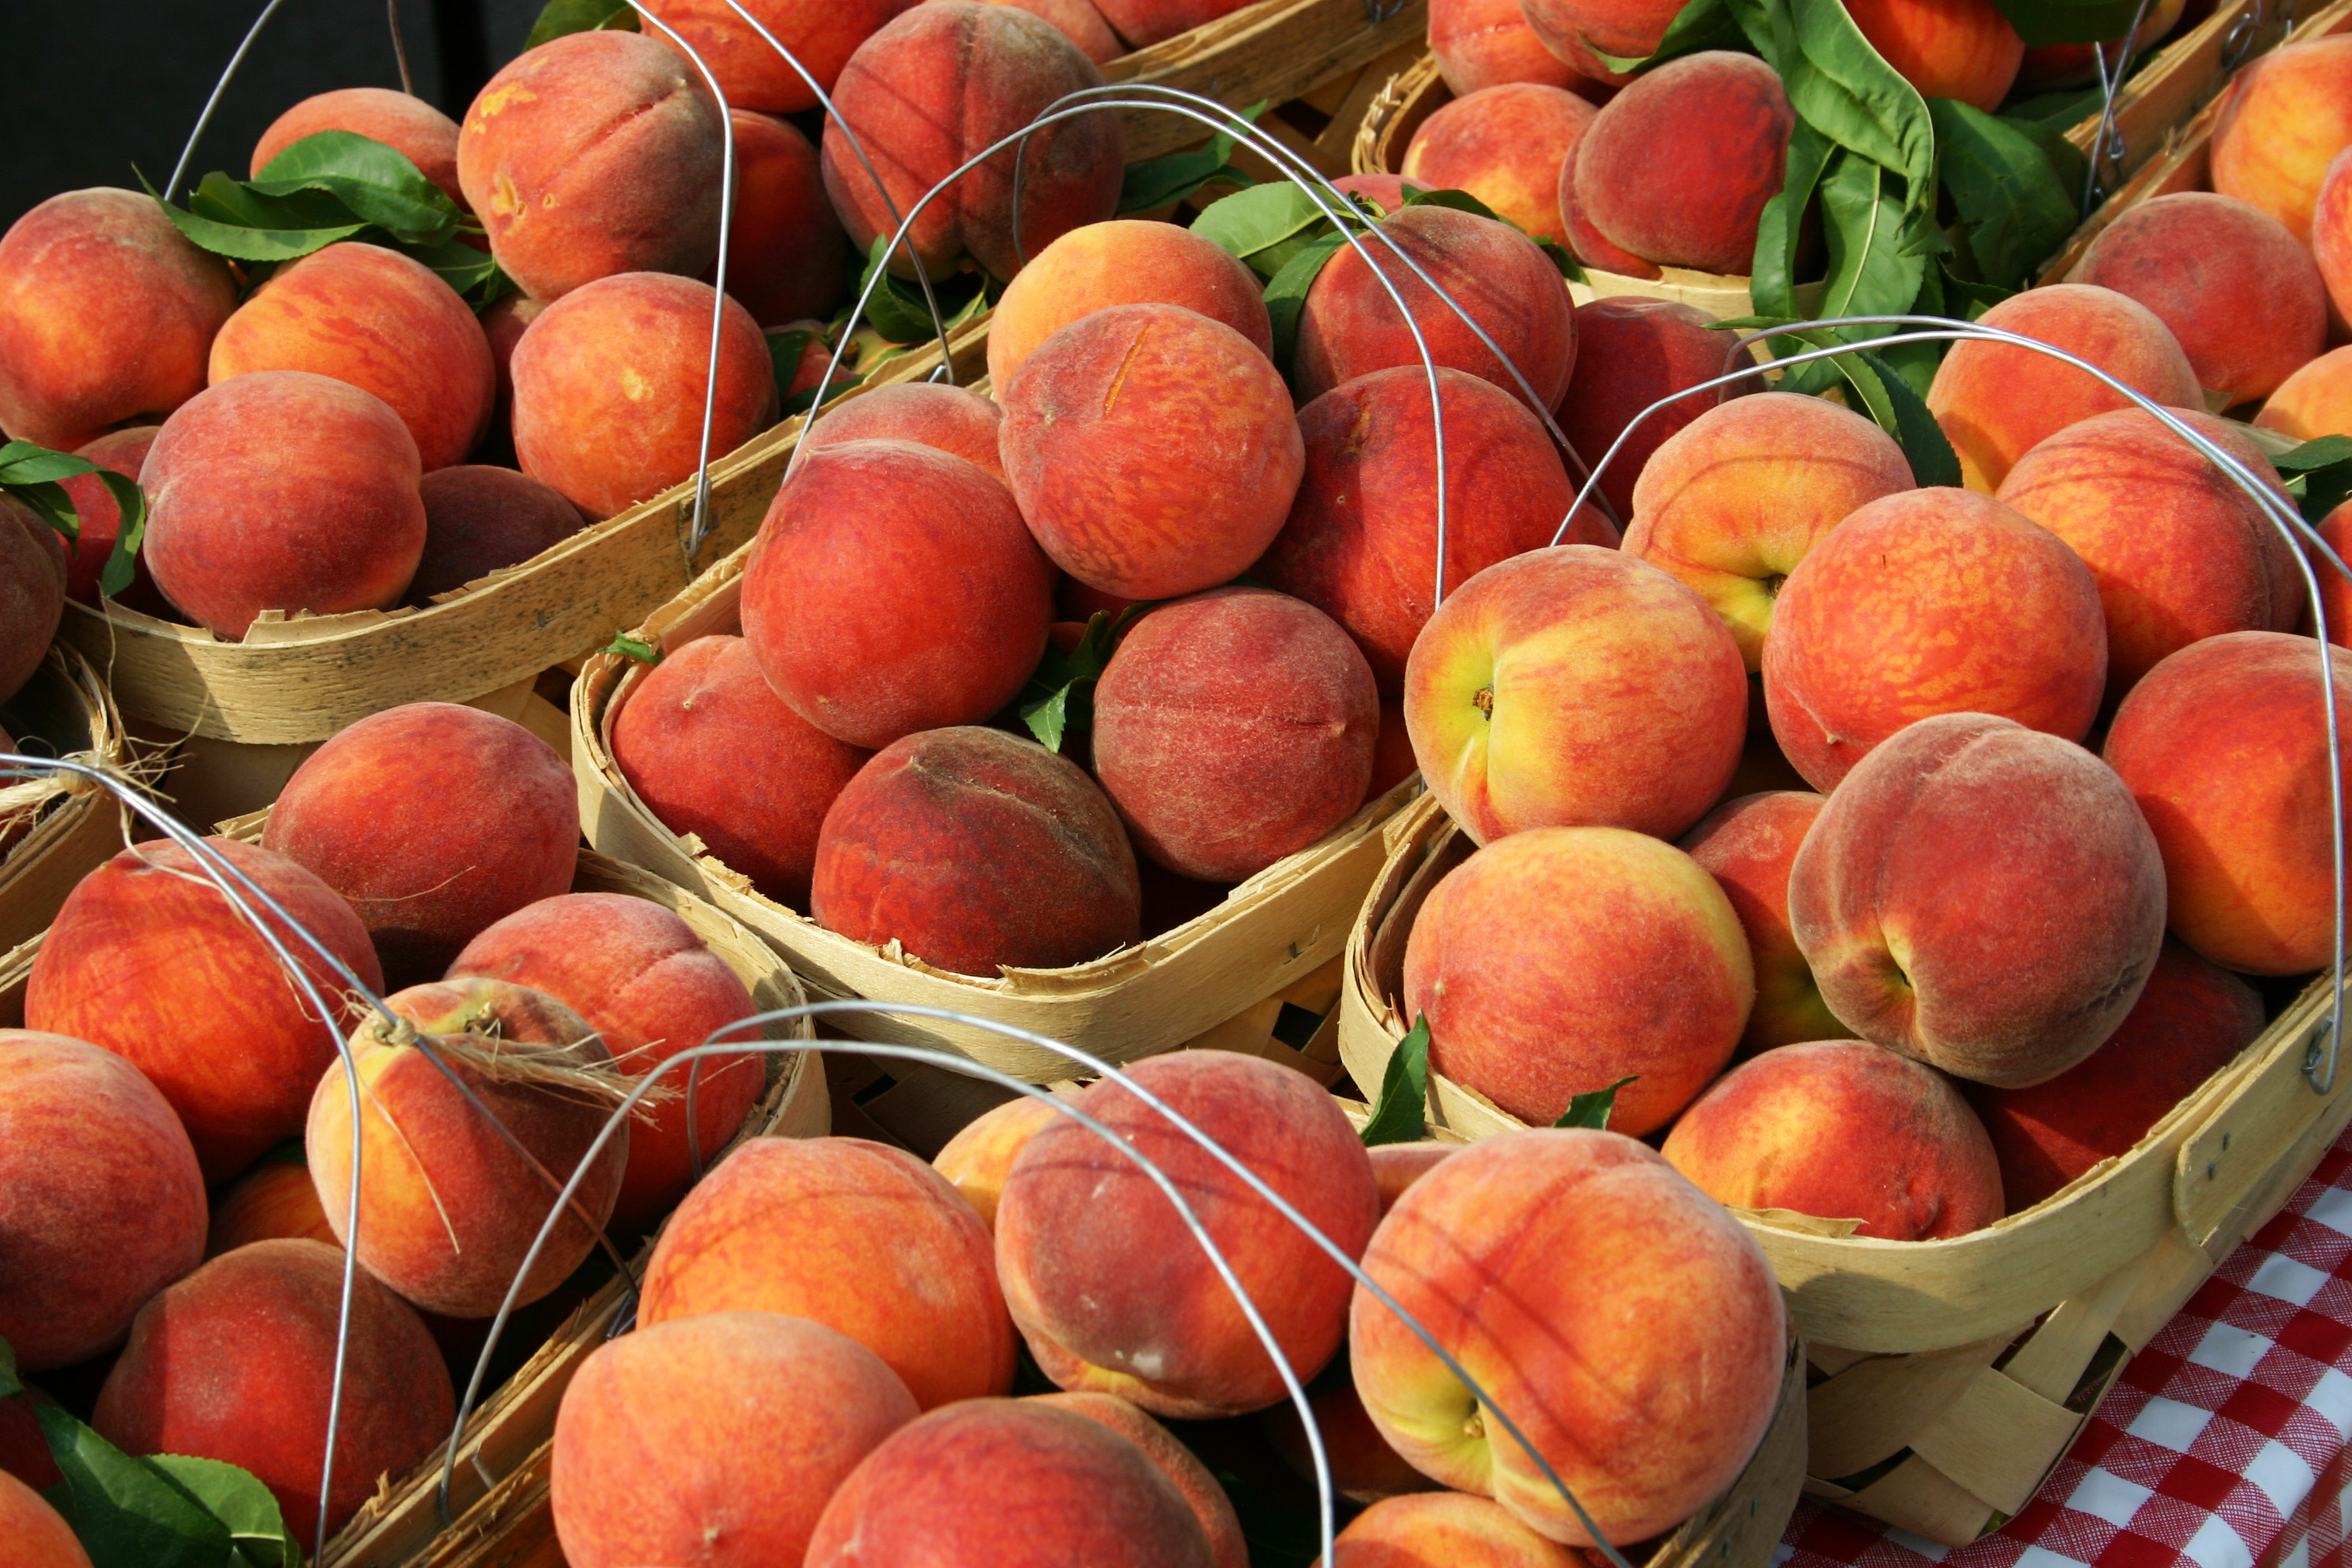 Image of peaches in baskets on a table